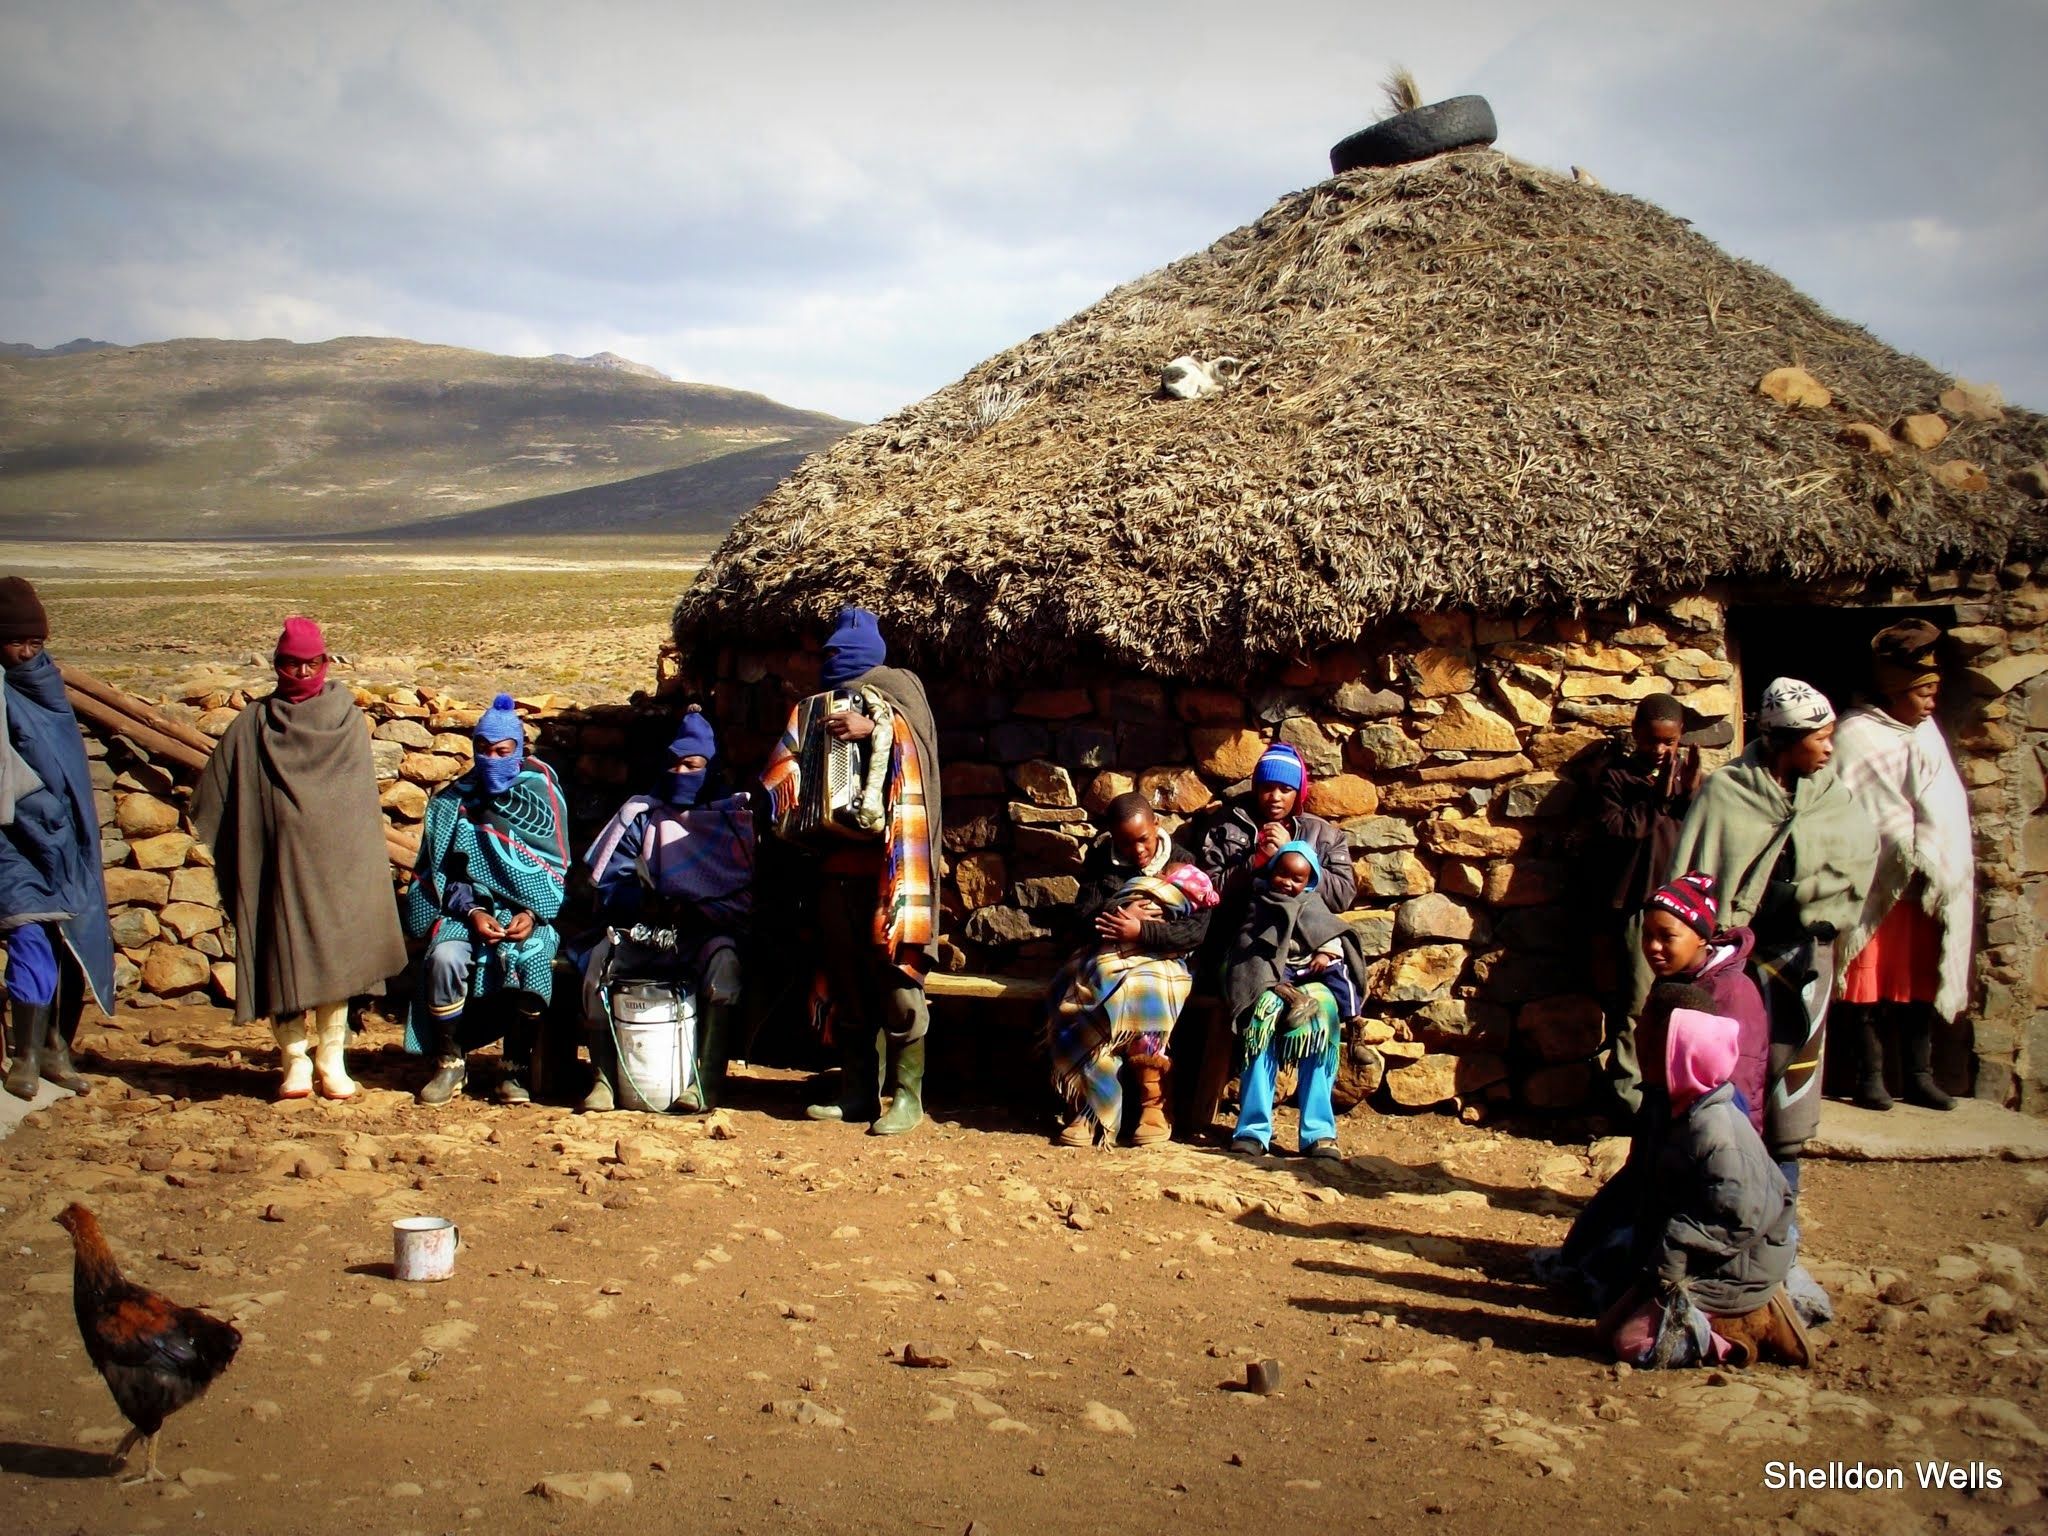 A group of Basotho people stand together facing the camera. The people are dressed in traditional blankets. The stand in front of a traditional basotho hut with a grass roof and stone walls.